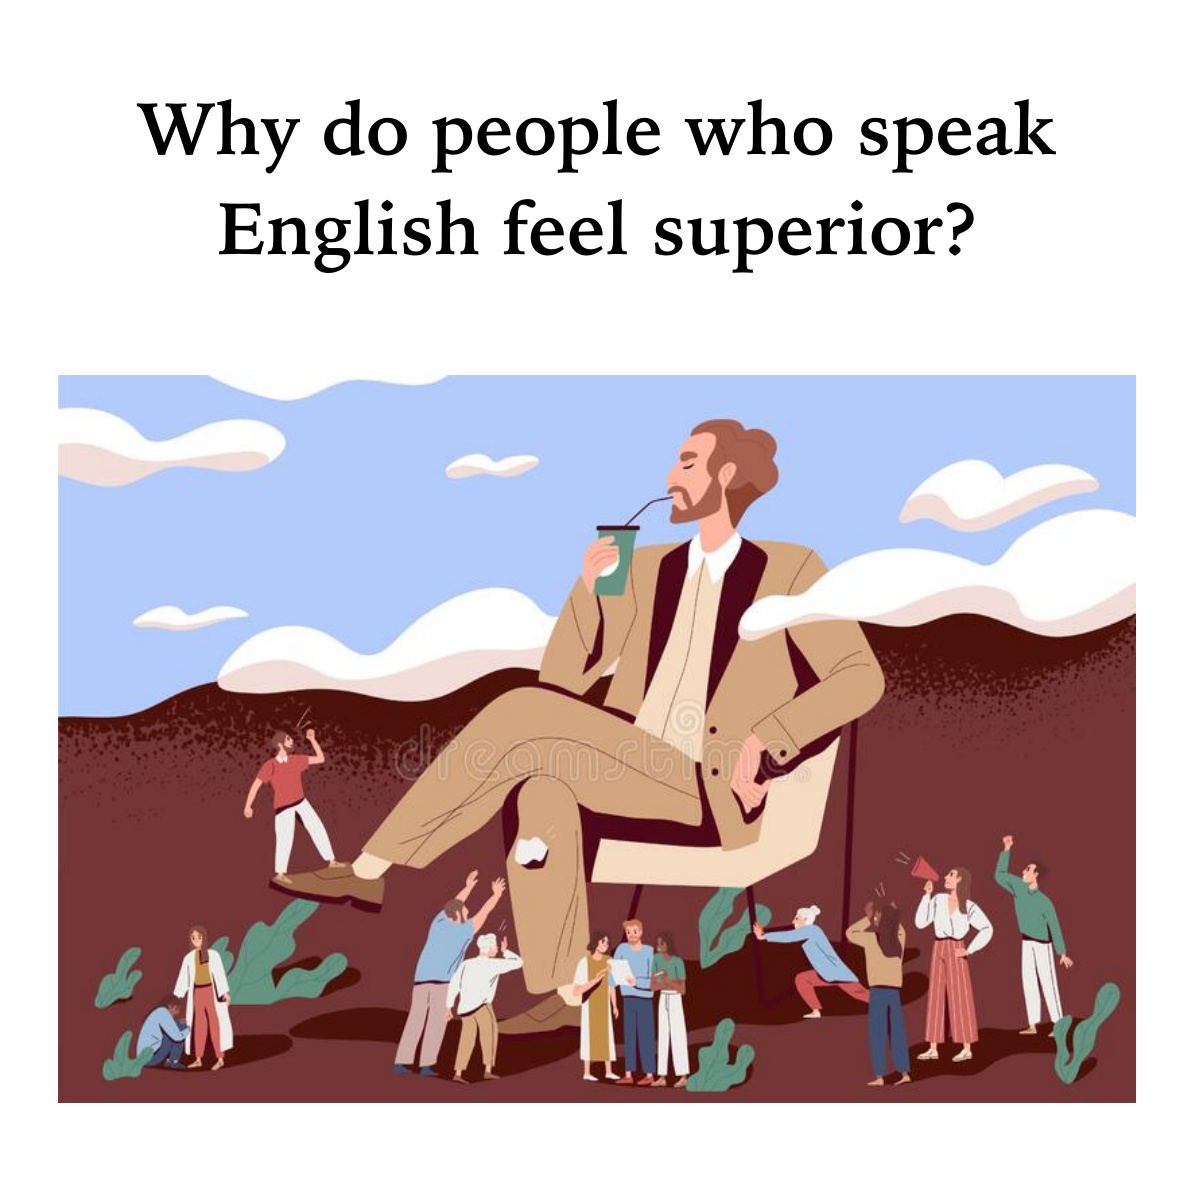 Why do people who speak English feel superior?